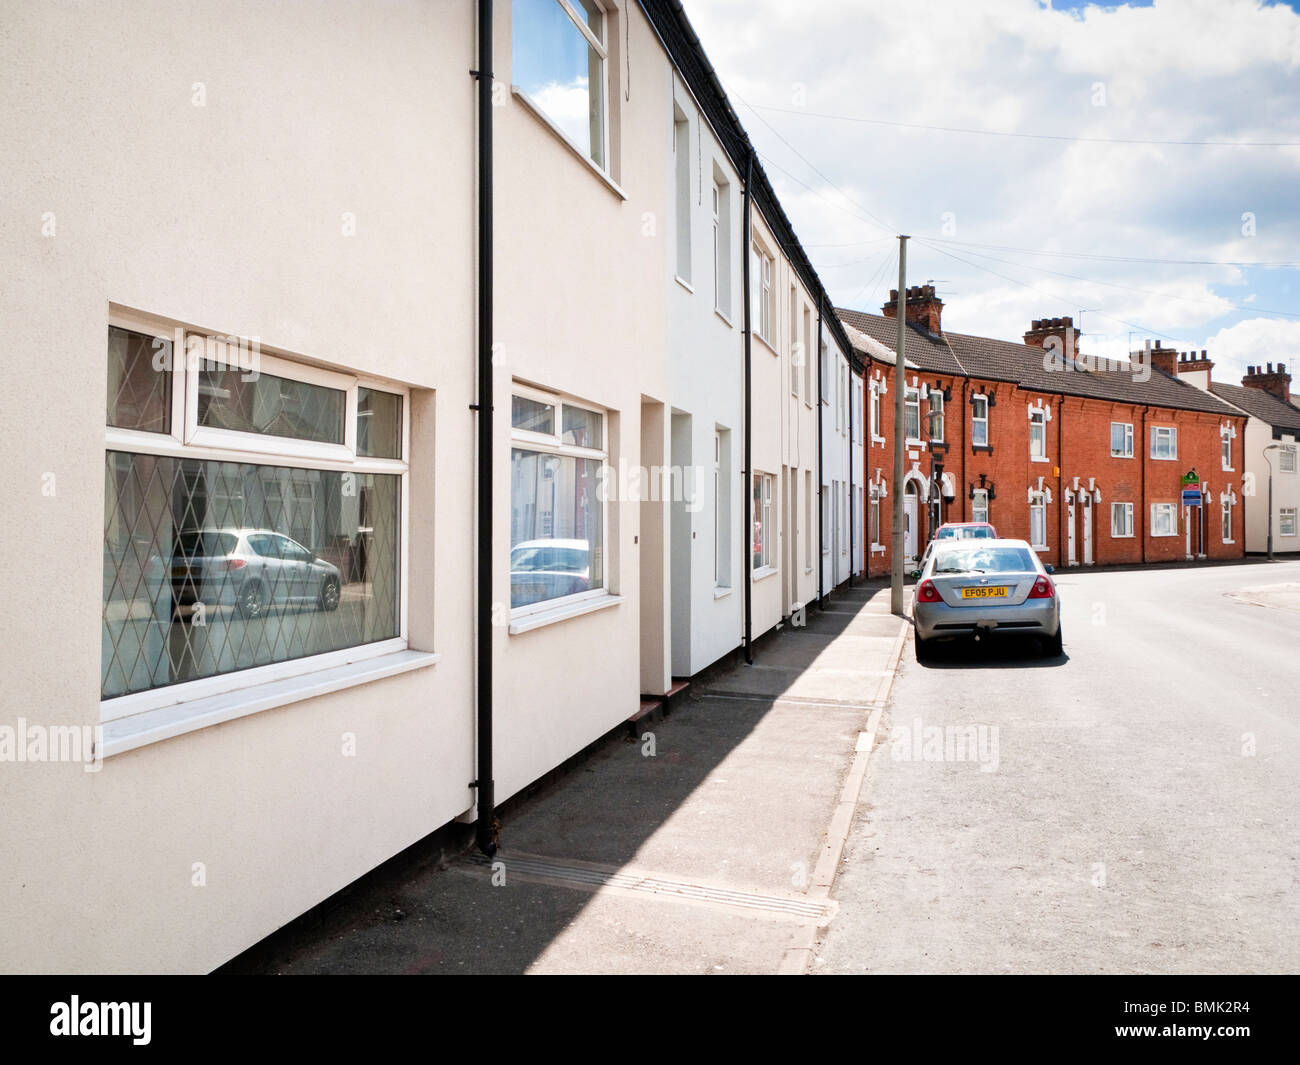 Terraced houses, in a street in the north of England, UK Stock Photo